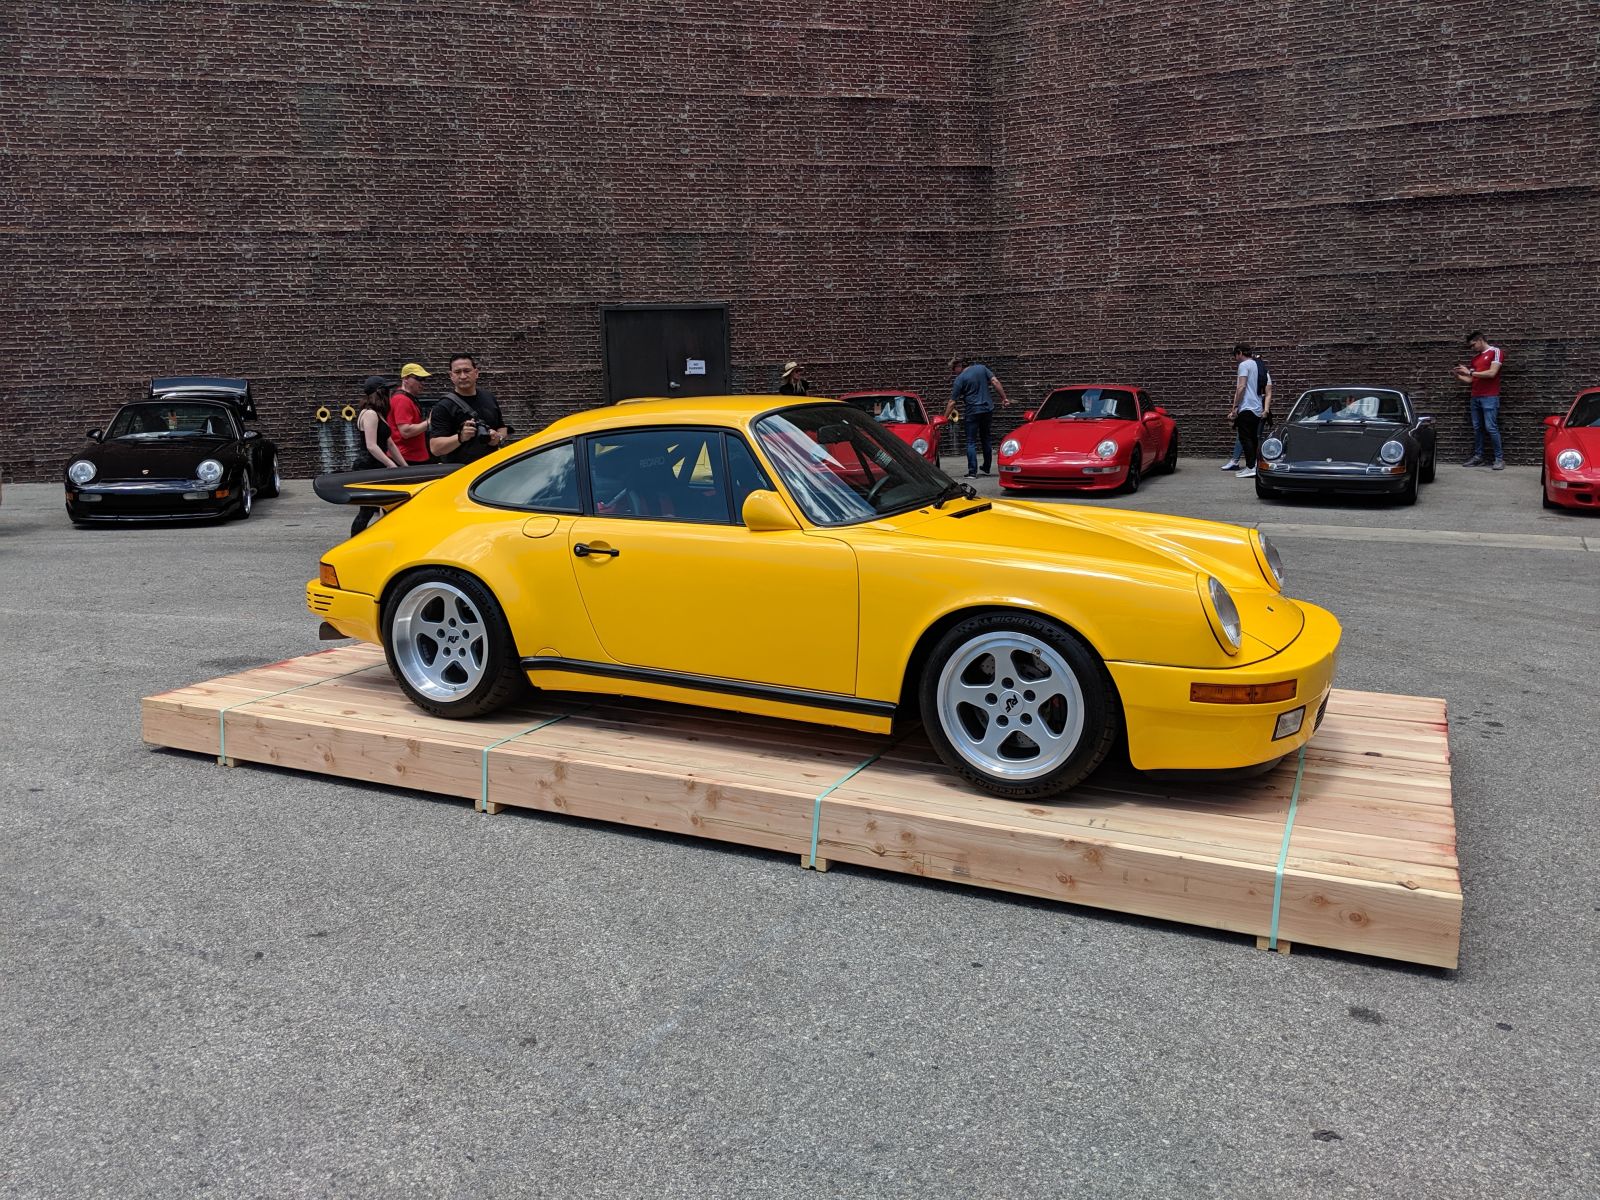 Why yes, that IS a RUF yellowbird!